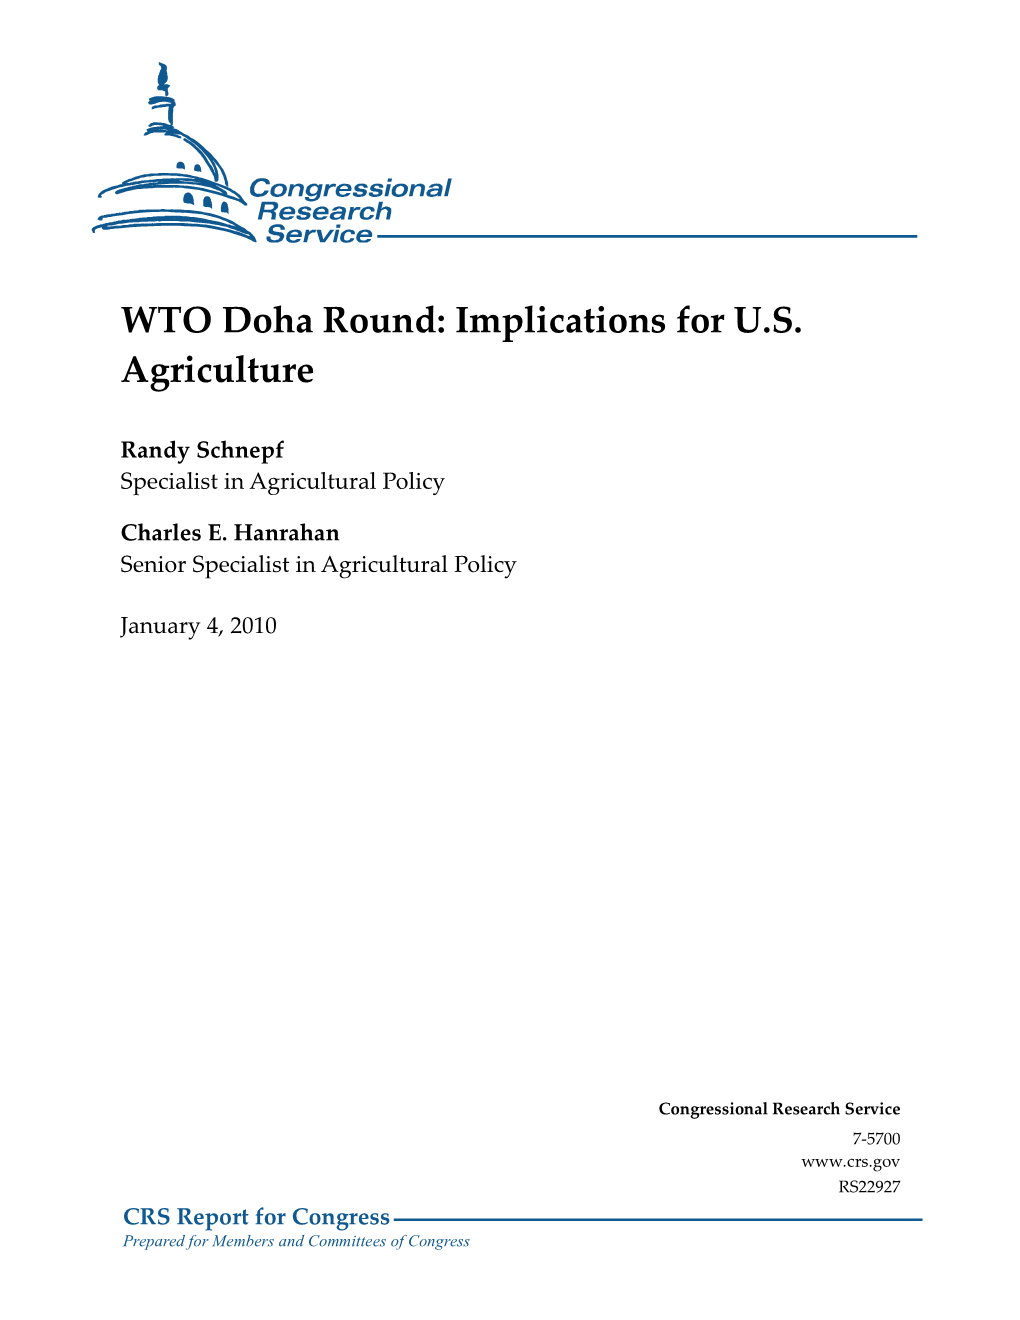 WTO Doha Round: Implications for U.S